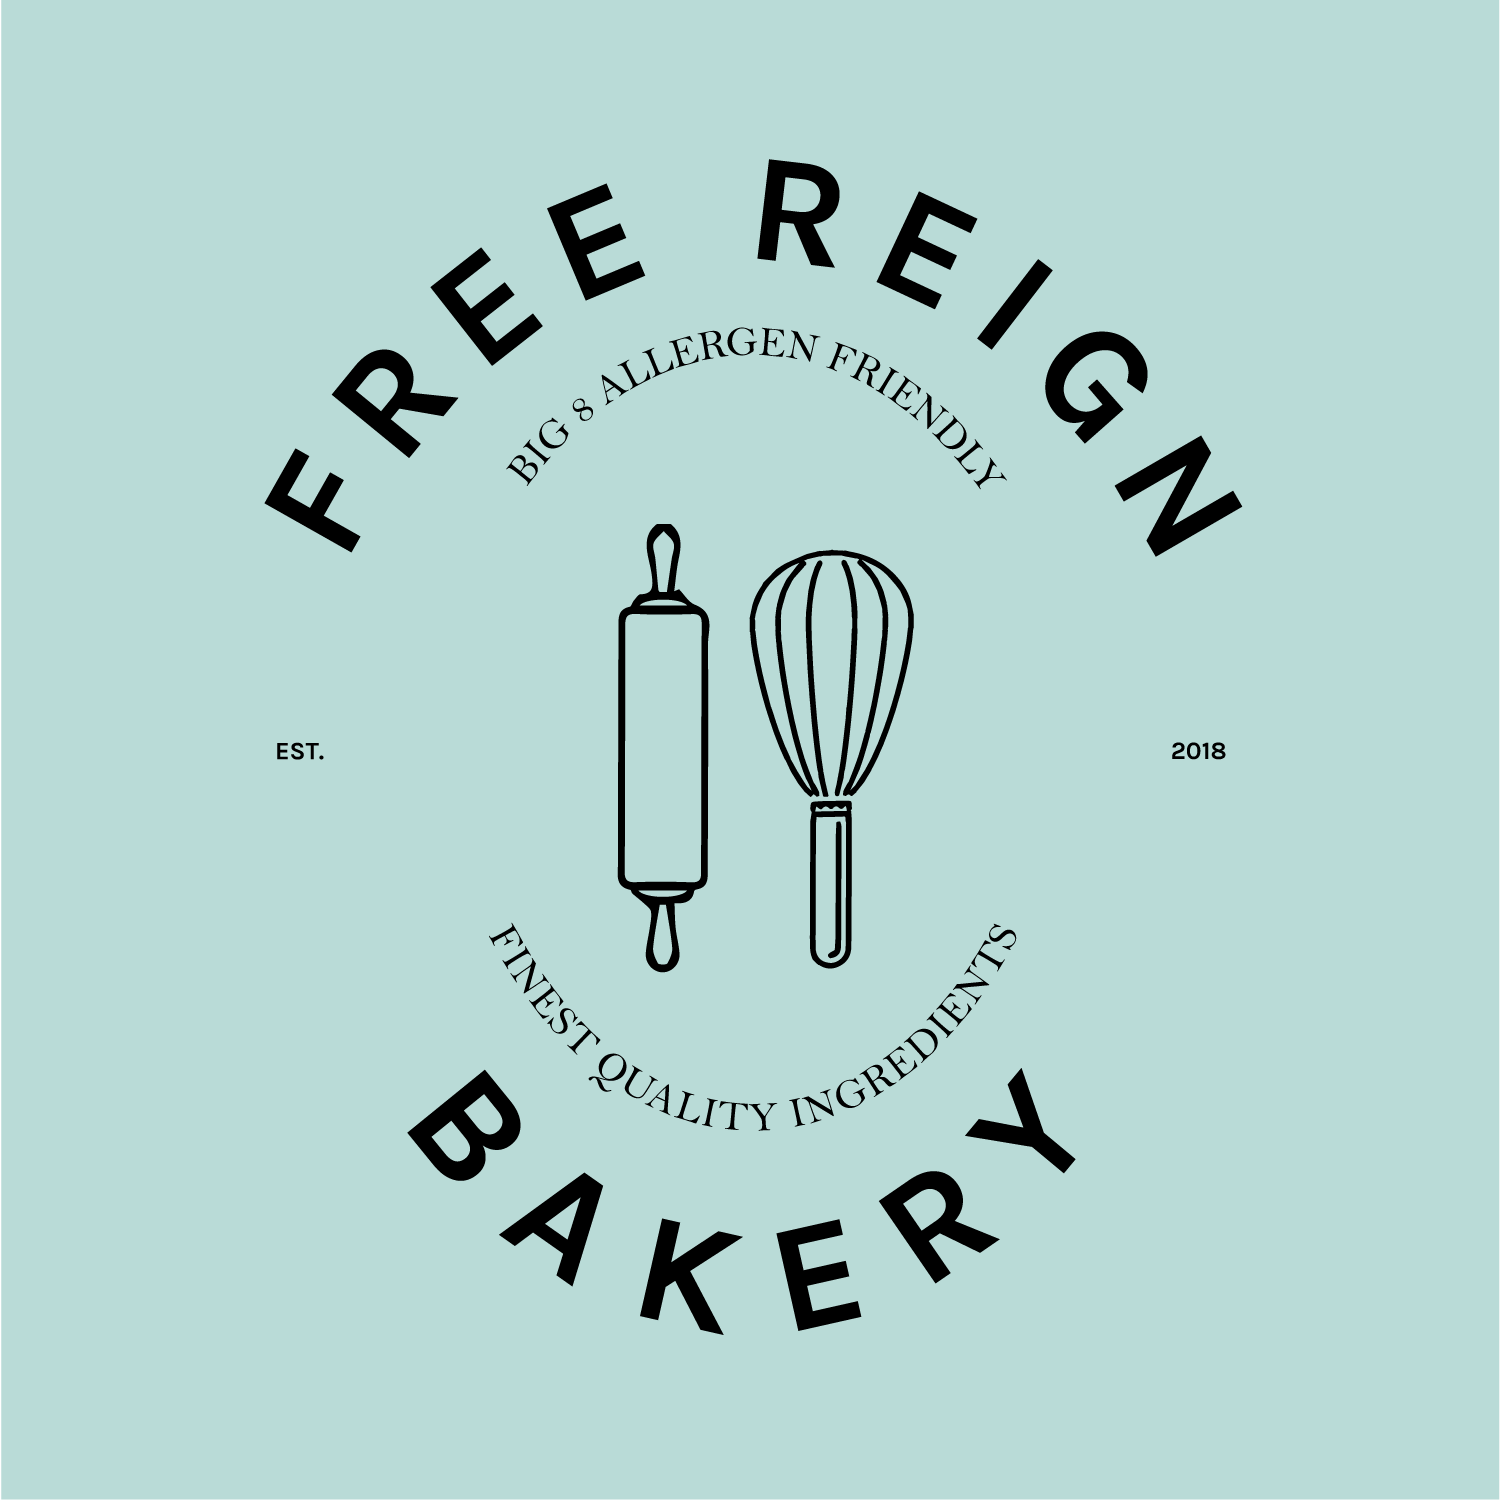 Free Reign Bakery